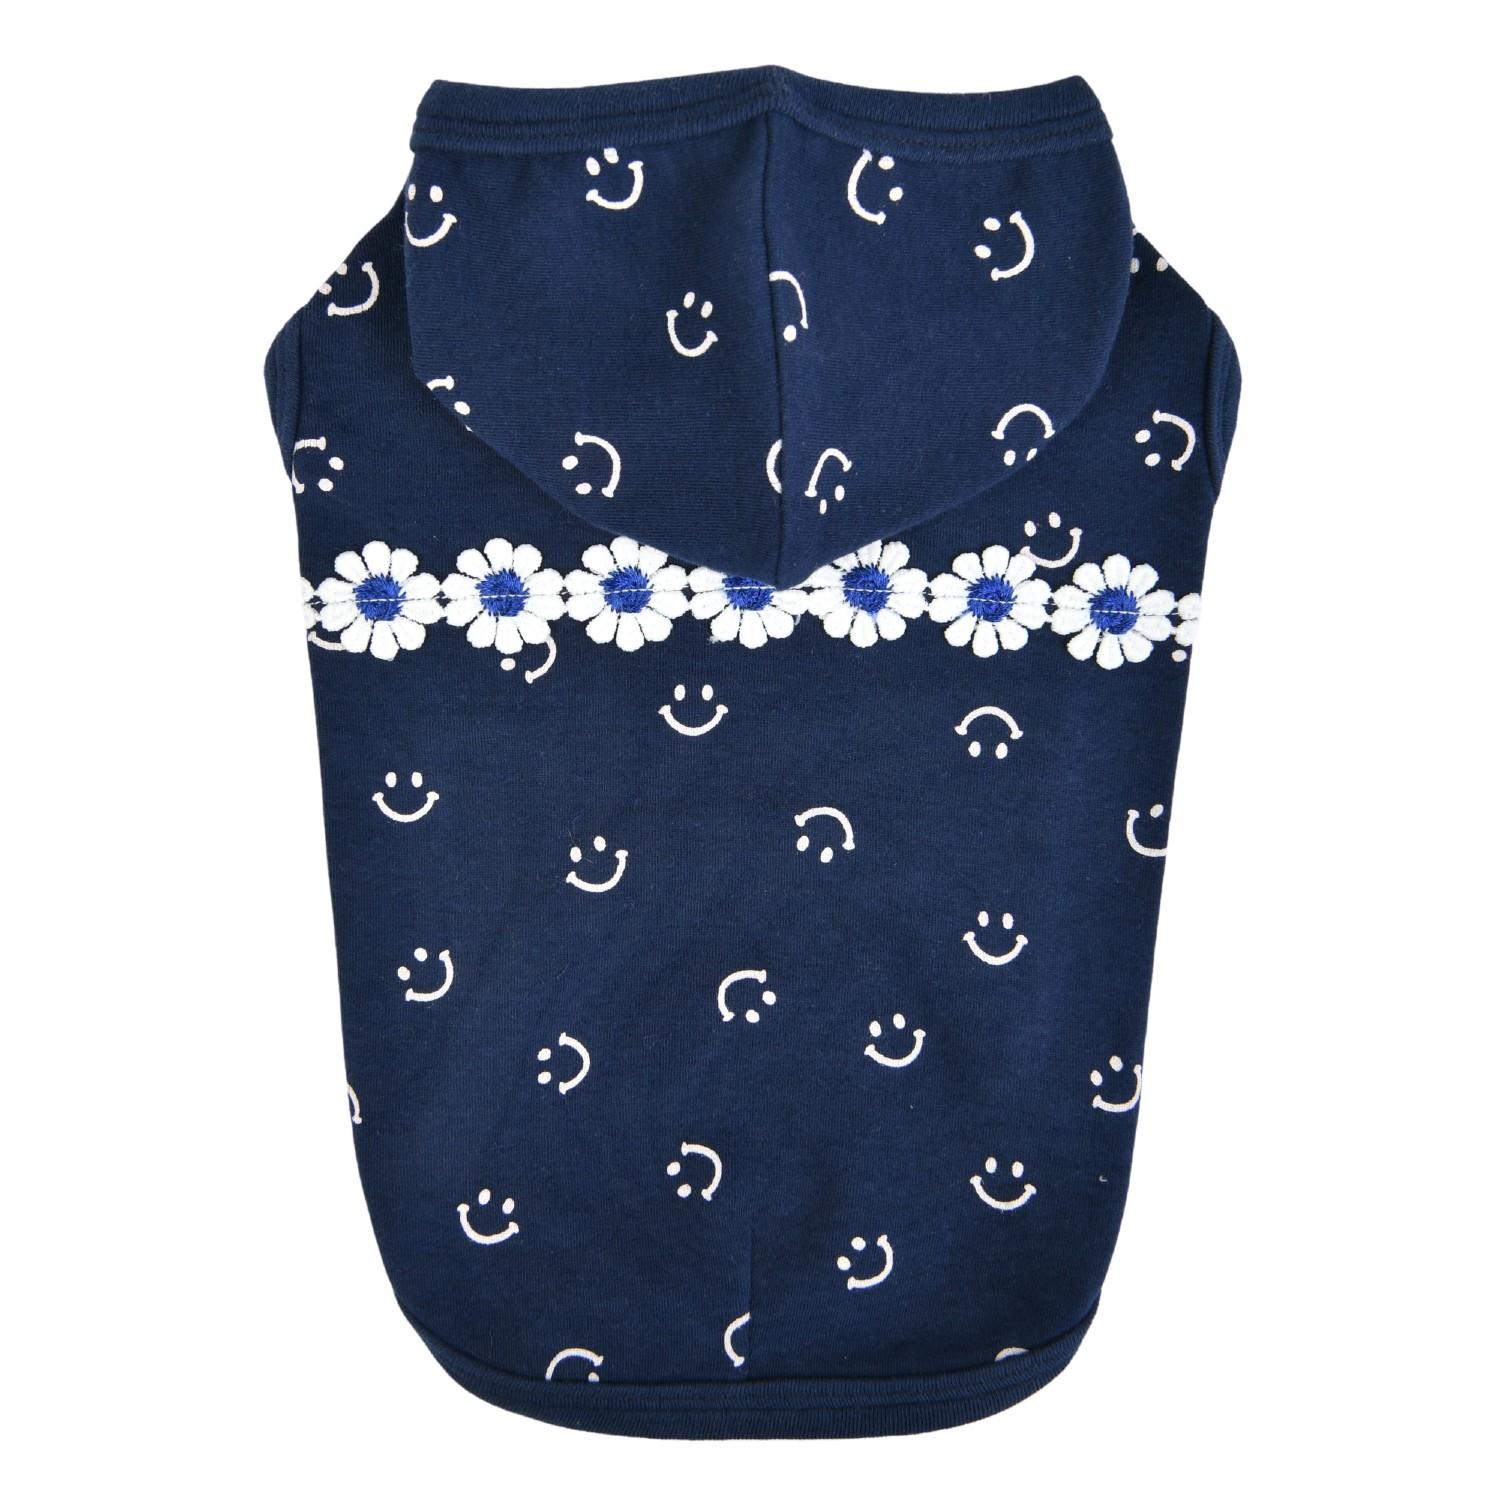 Leta Hooded Dog T-Shirt by Pinkaholic - Navy